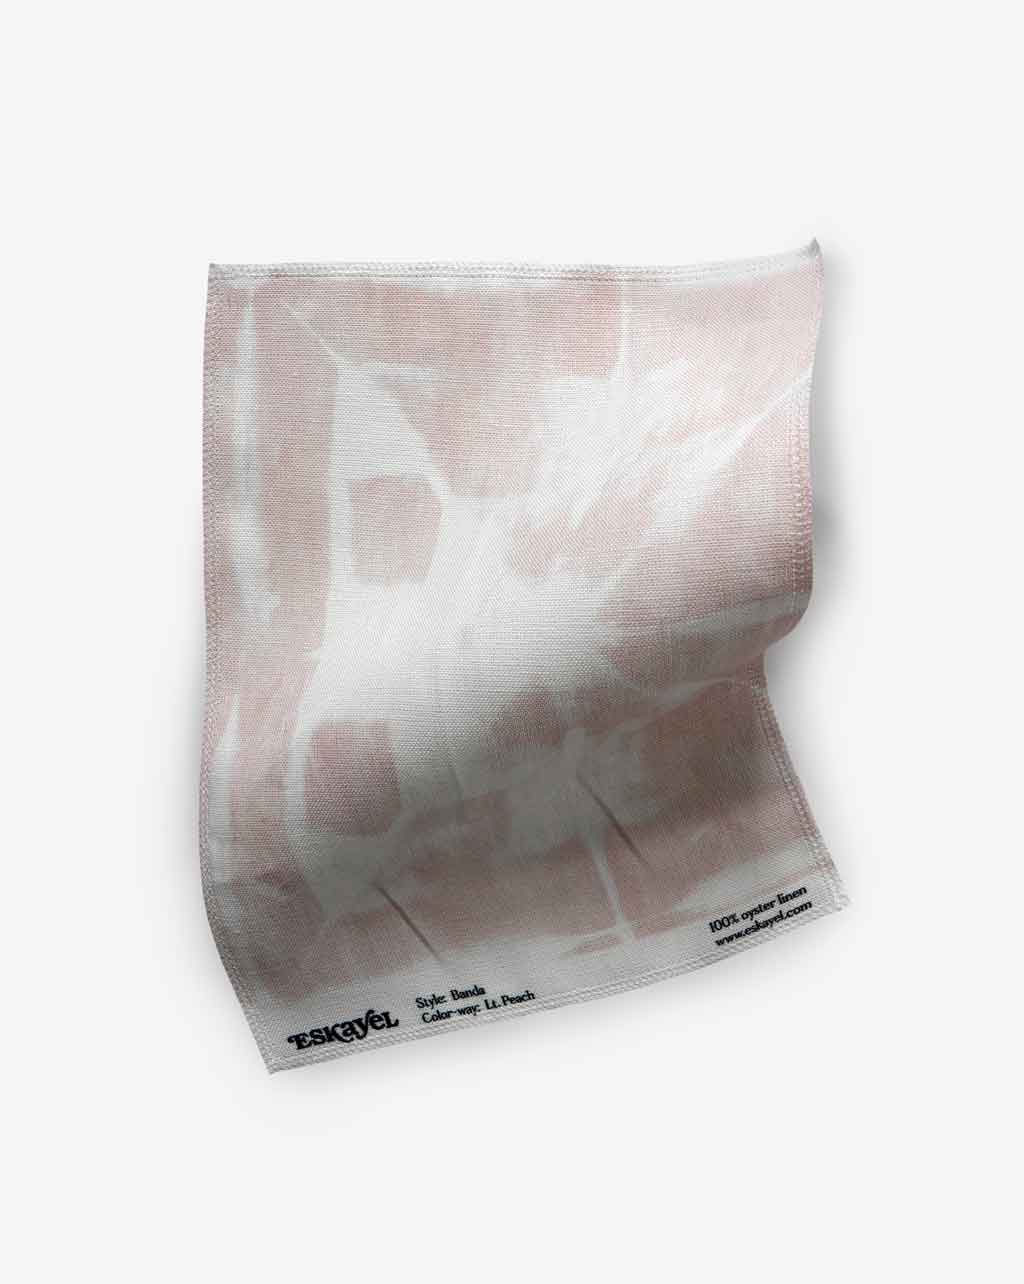 A Banda Fabric Sample||Light Peach towel on a white surface can be ordered.